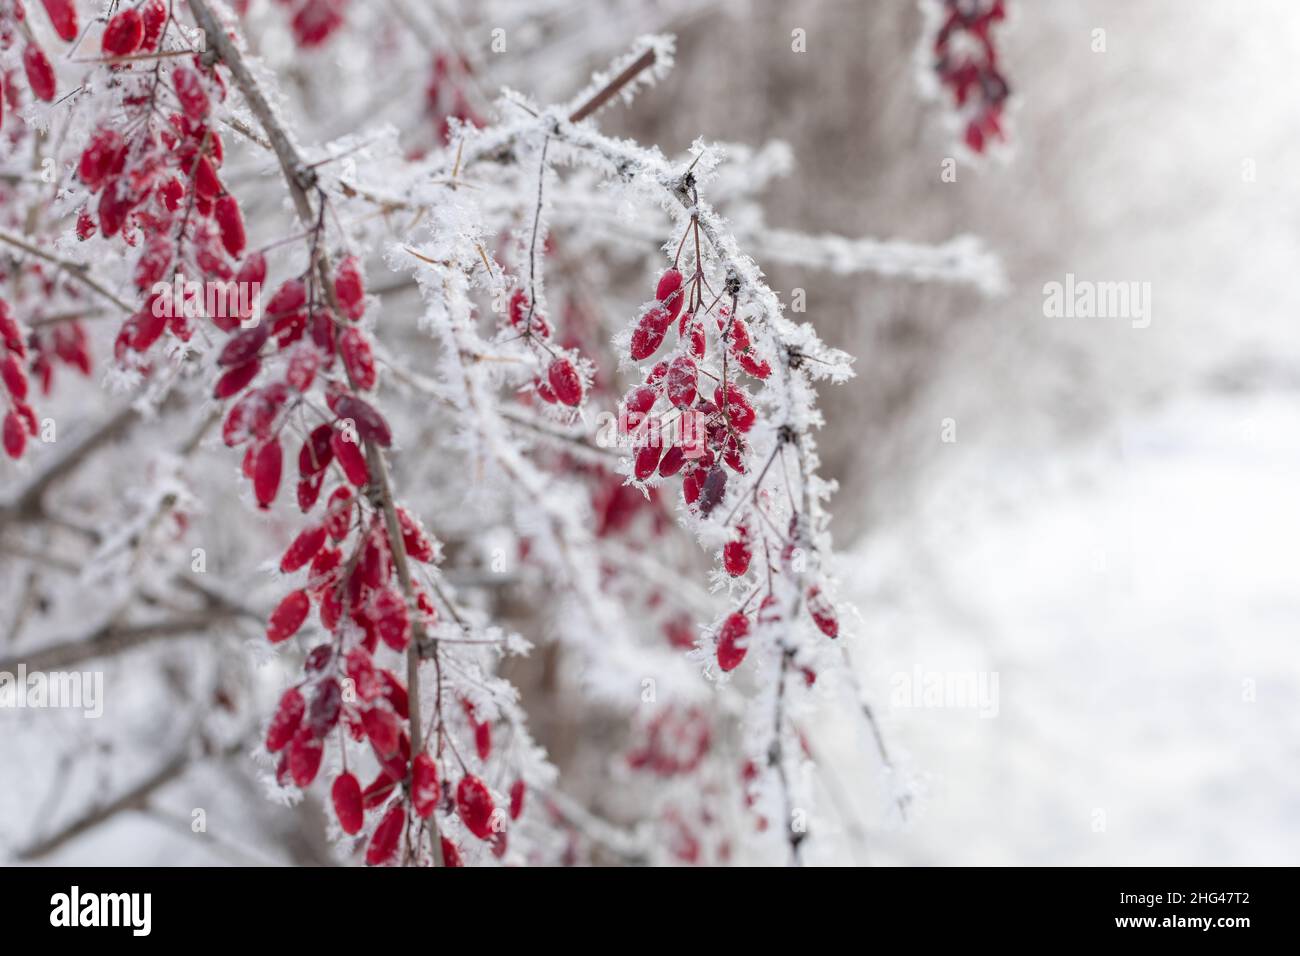 Closeup of twigs with barberries covered with frost with blurred tree branches and snow in background in daytime. Gathering healthy berries in winter Stock Photo